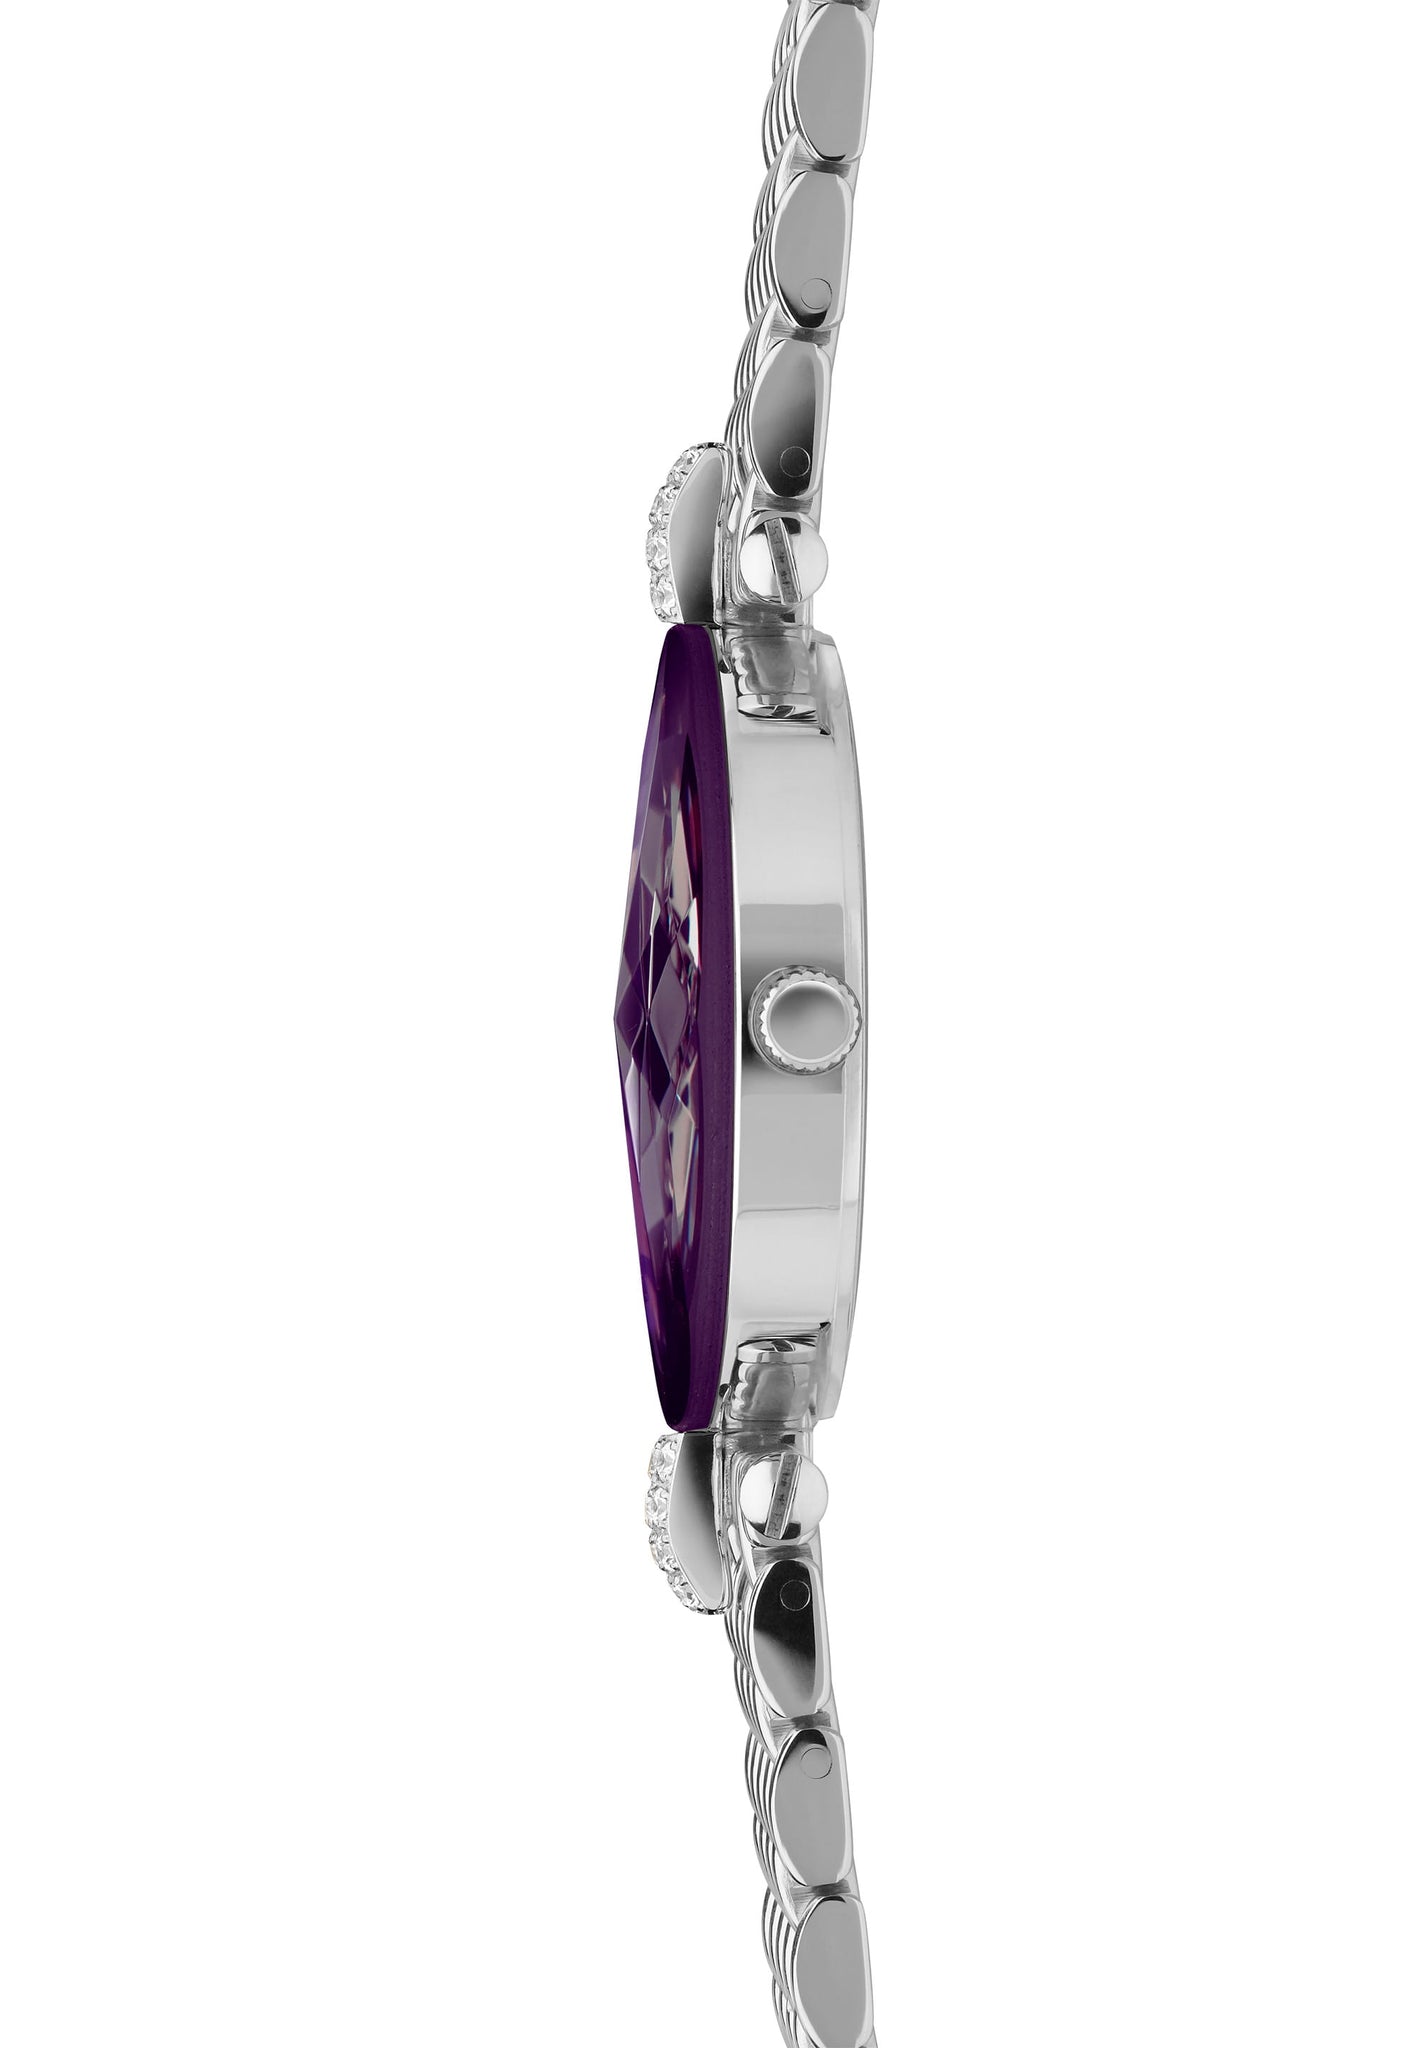 Facet Strass Reloj Mujer Suizo J5.702.M